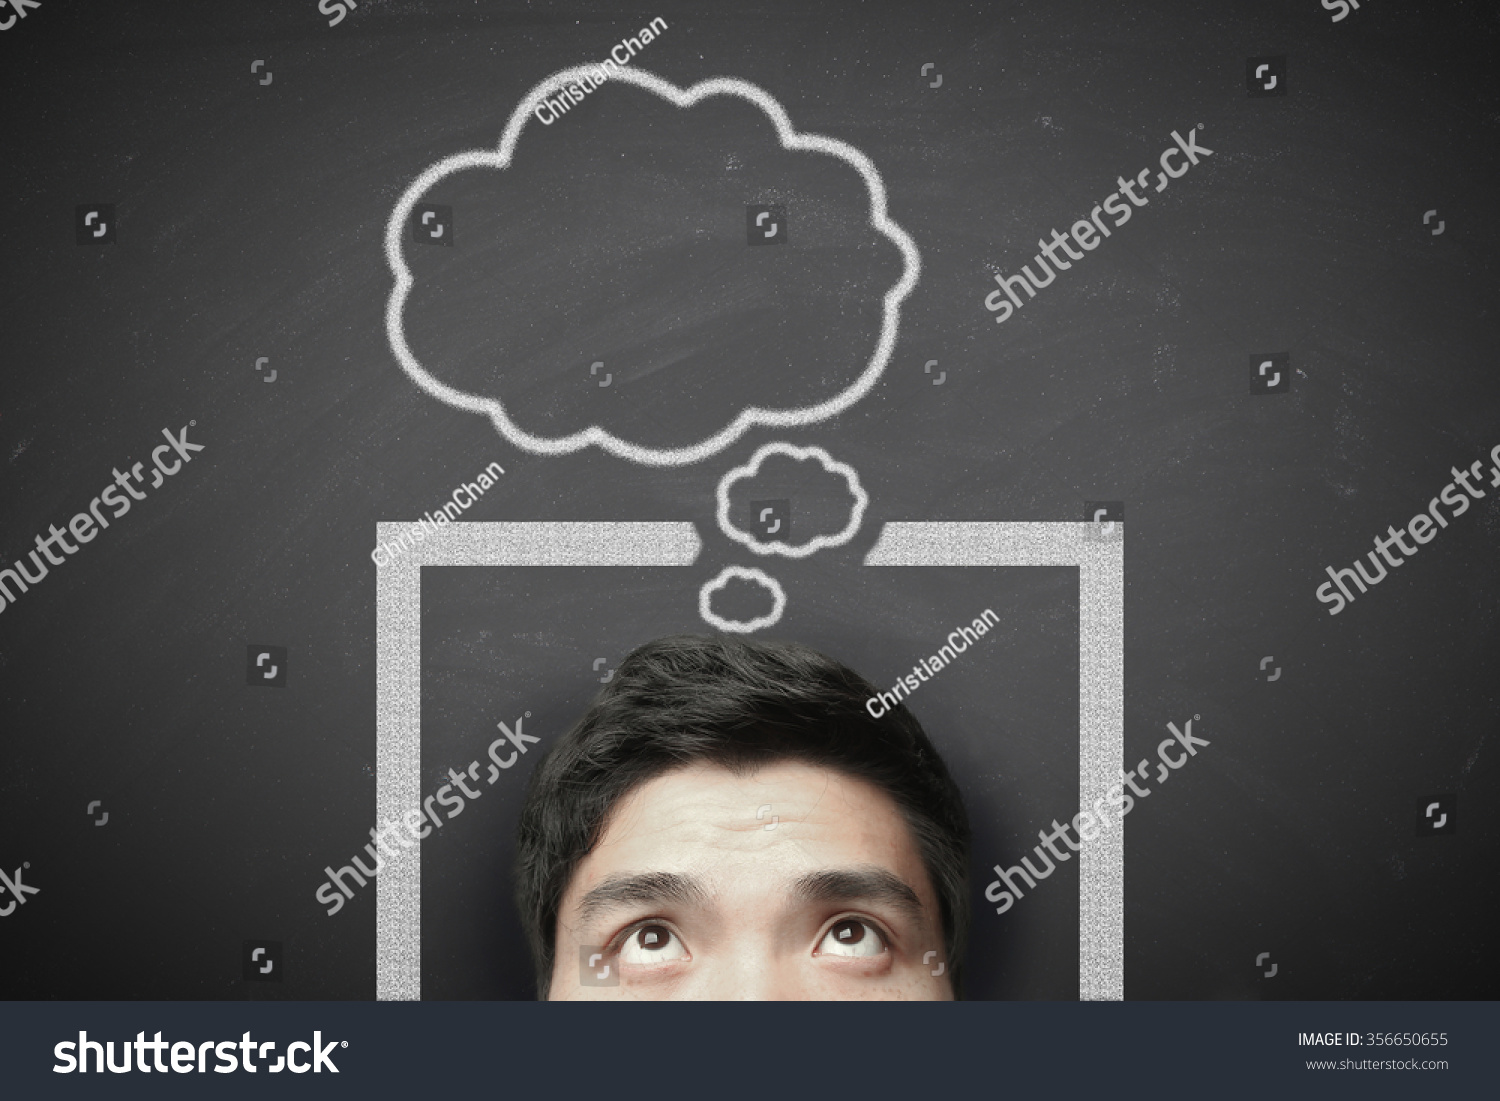 Man thinking outside the box with blackboard background. #356650655